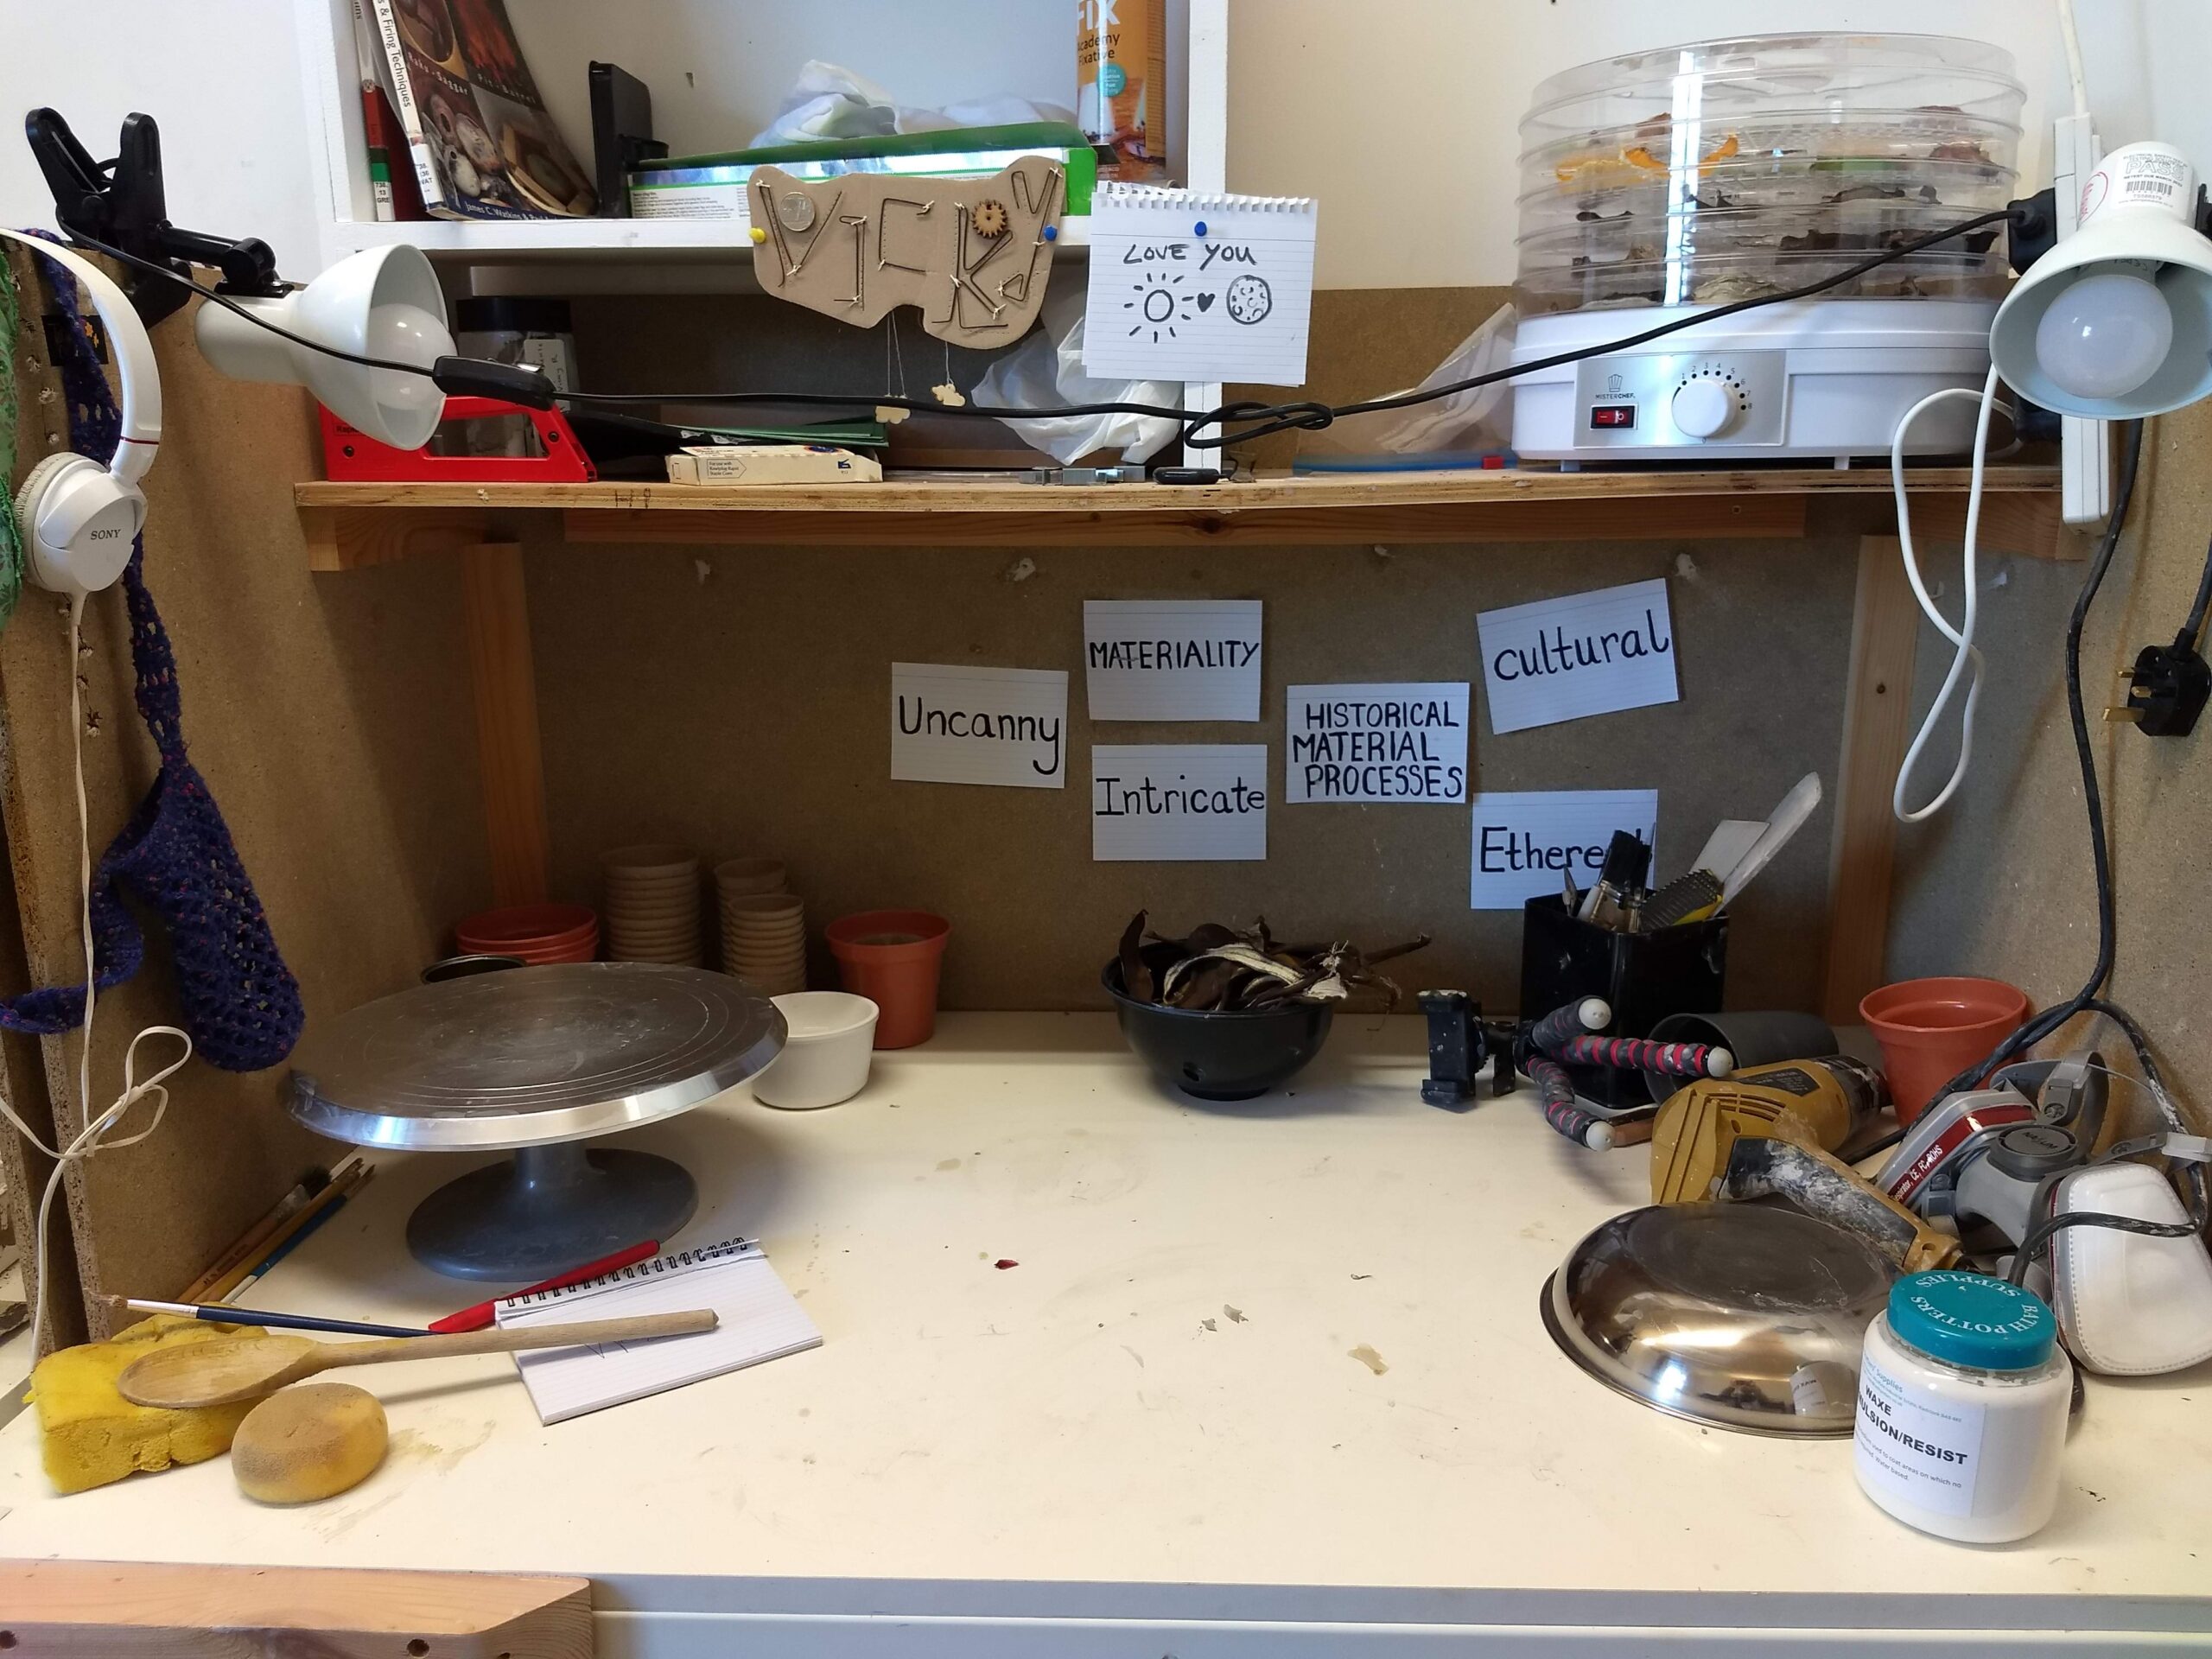 An image of Vicky's workspace. There is a large desk holding various ceramic tools.